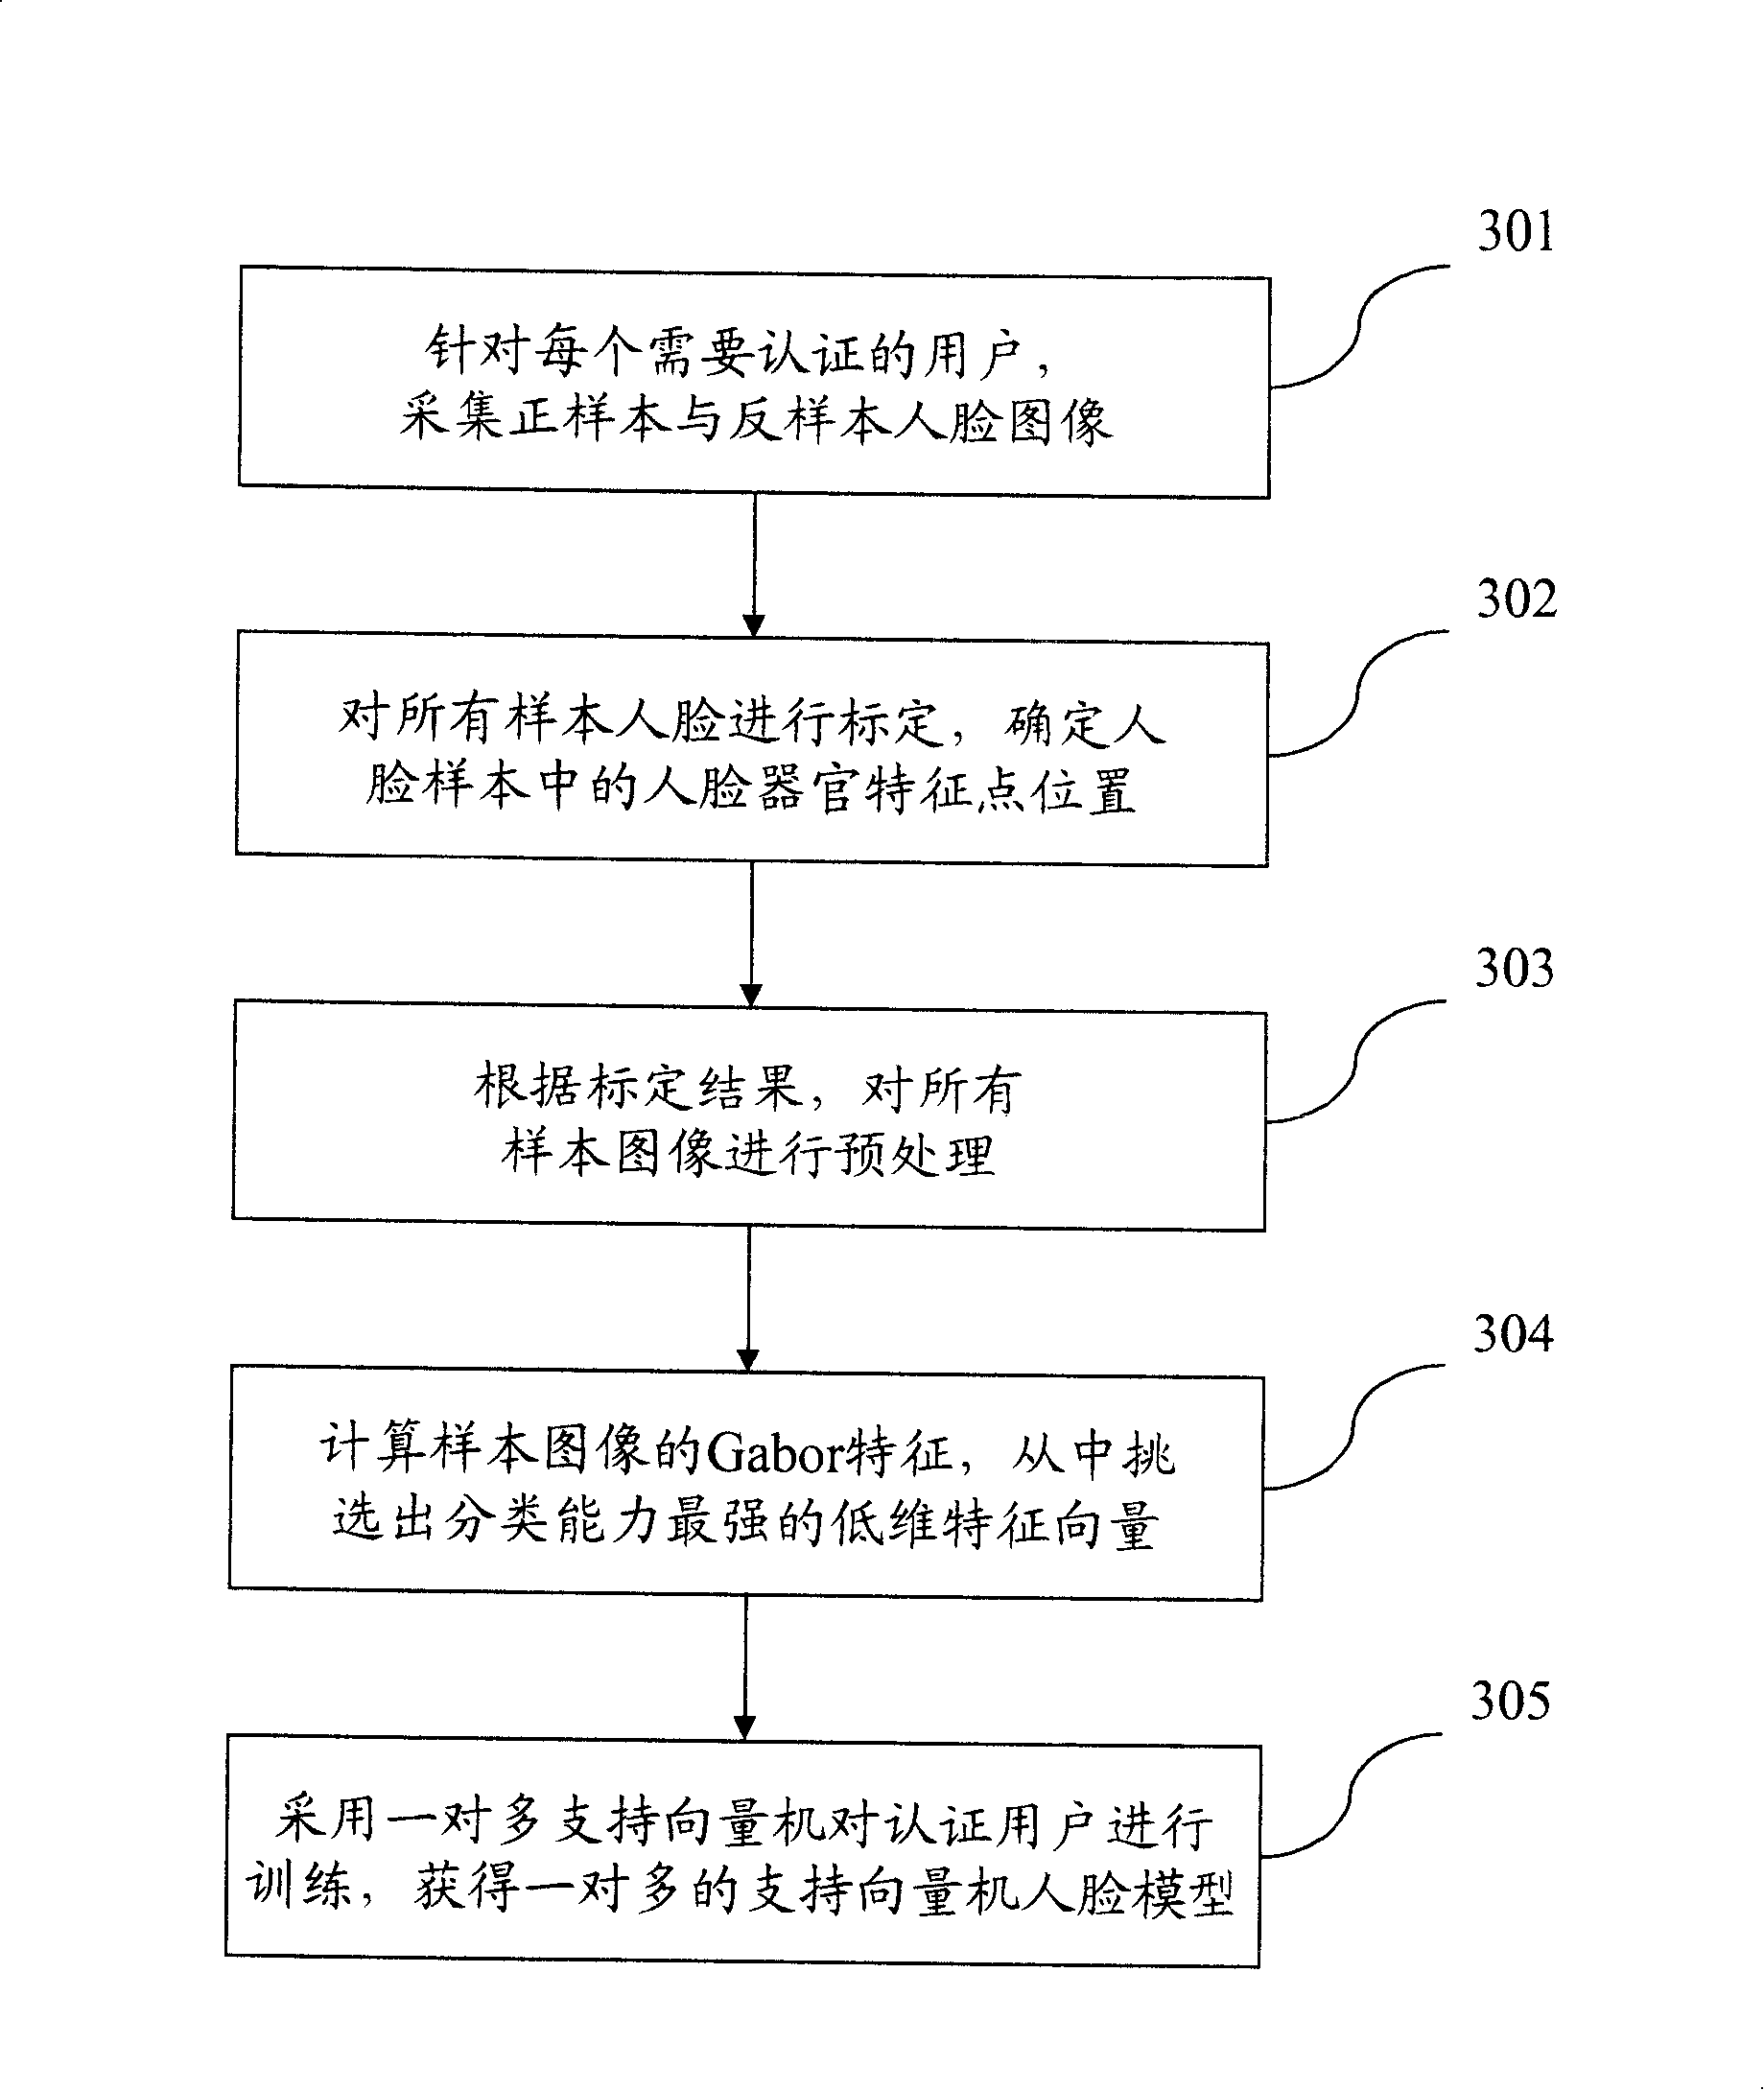 Screen protection method and apparatus based on human face identification